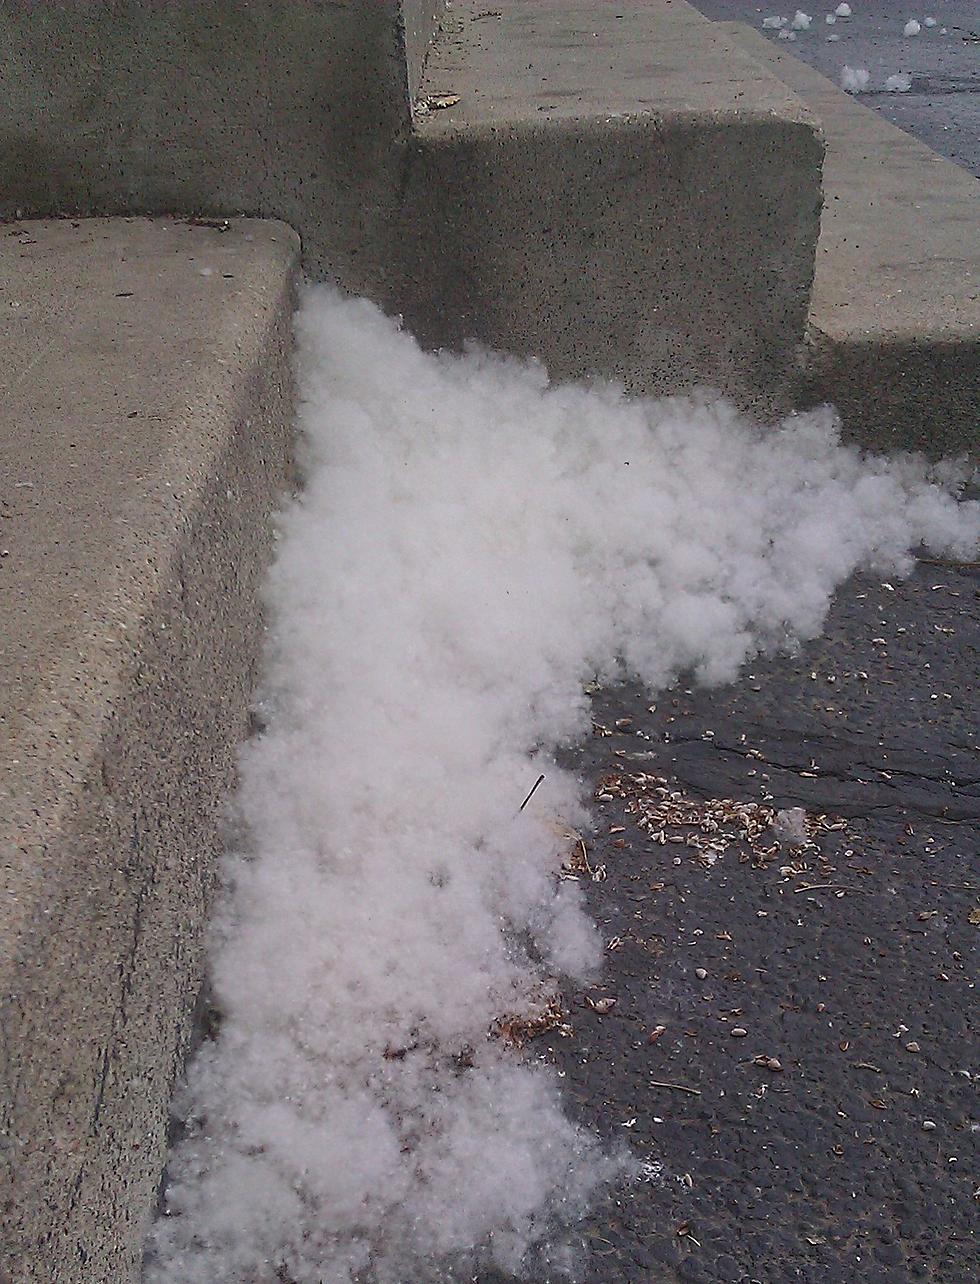 Snow or Cotton? It’s Annoying, But Does it Make You Sneeze? [Picture]